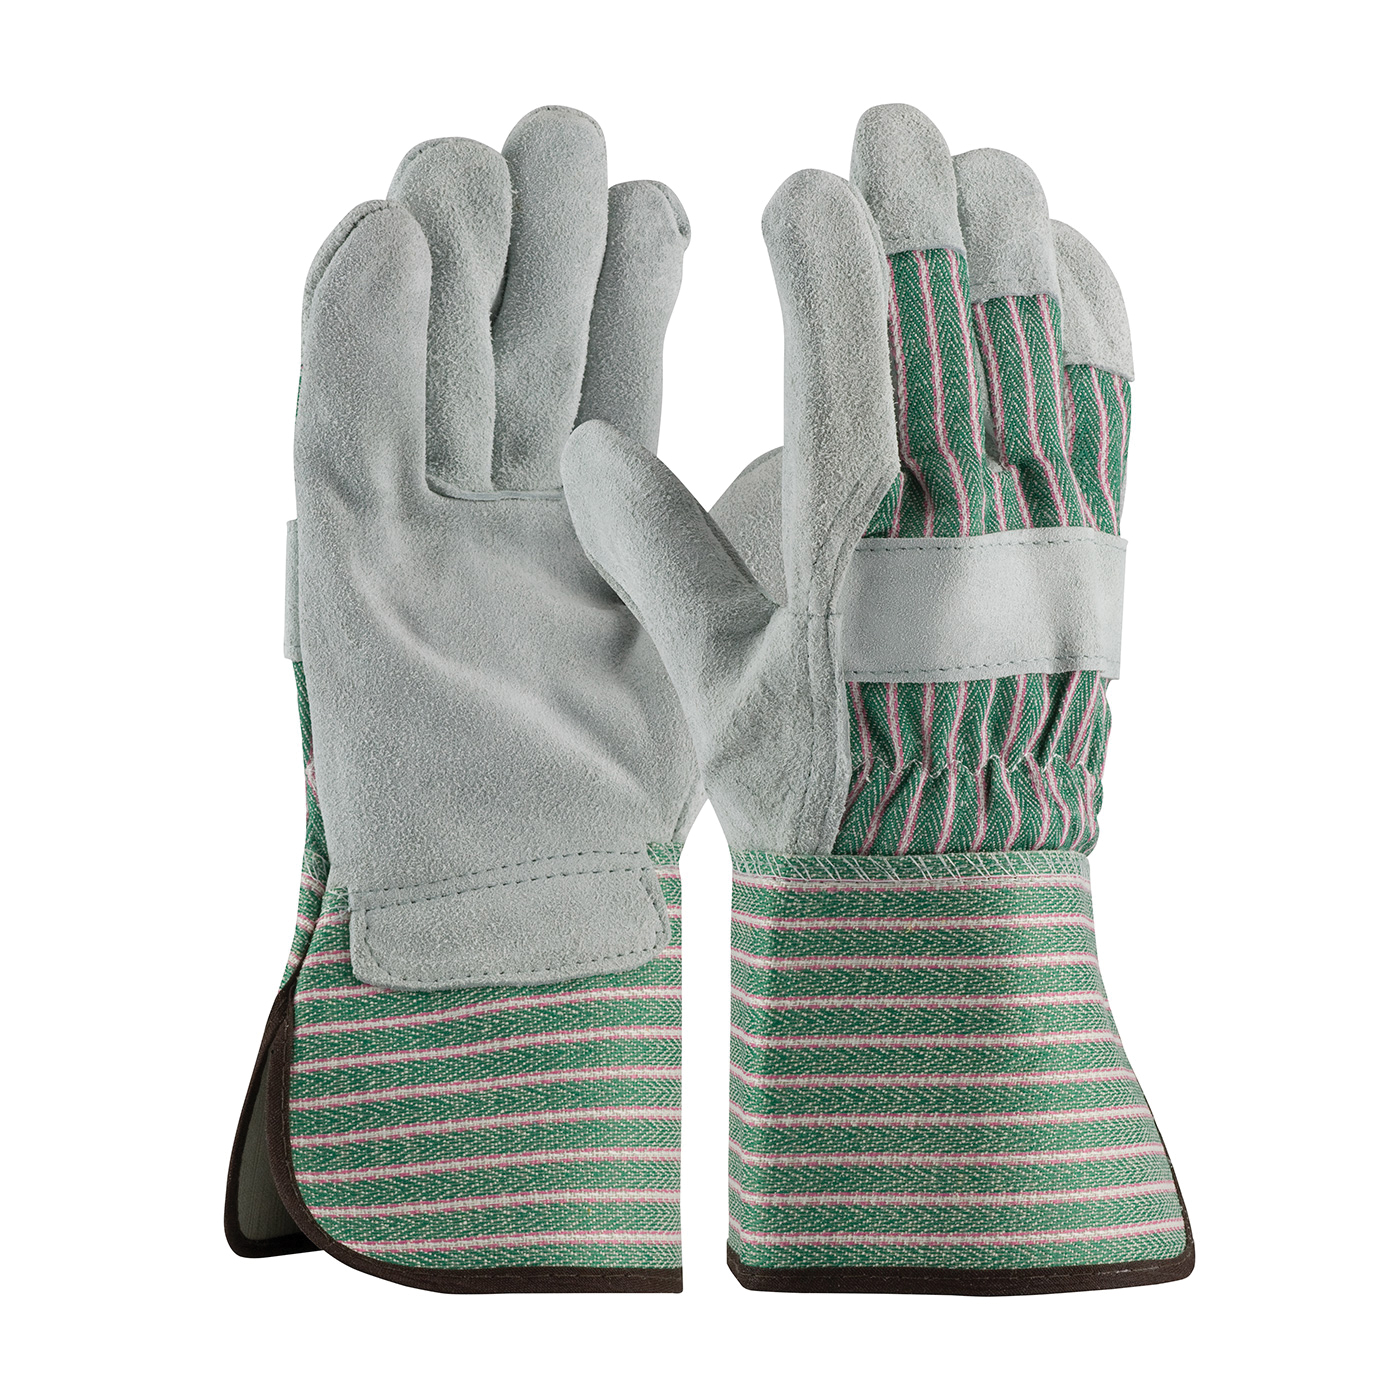 PIP® 83-6663/XL Bronze 83-6663 B-Grade General Purpose Gloves, Leather Palm, Gunn Cut with Wing Thumb Style, XL, Shoulder Split Cowhide Leather Palm, 75% Cowhide Leather/25% Cotton, Green/Gray/Pink, Gauntlet/Rubberized Cuff, Uncoated Coating, Cotton Lining